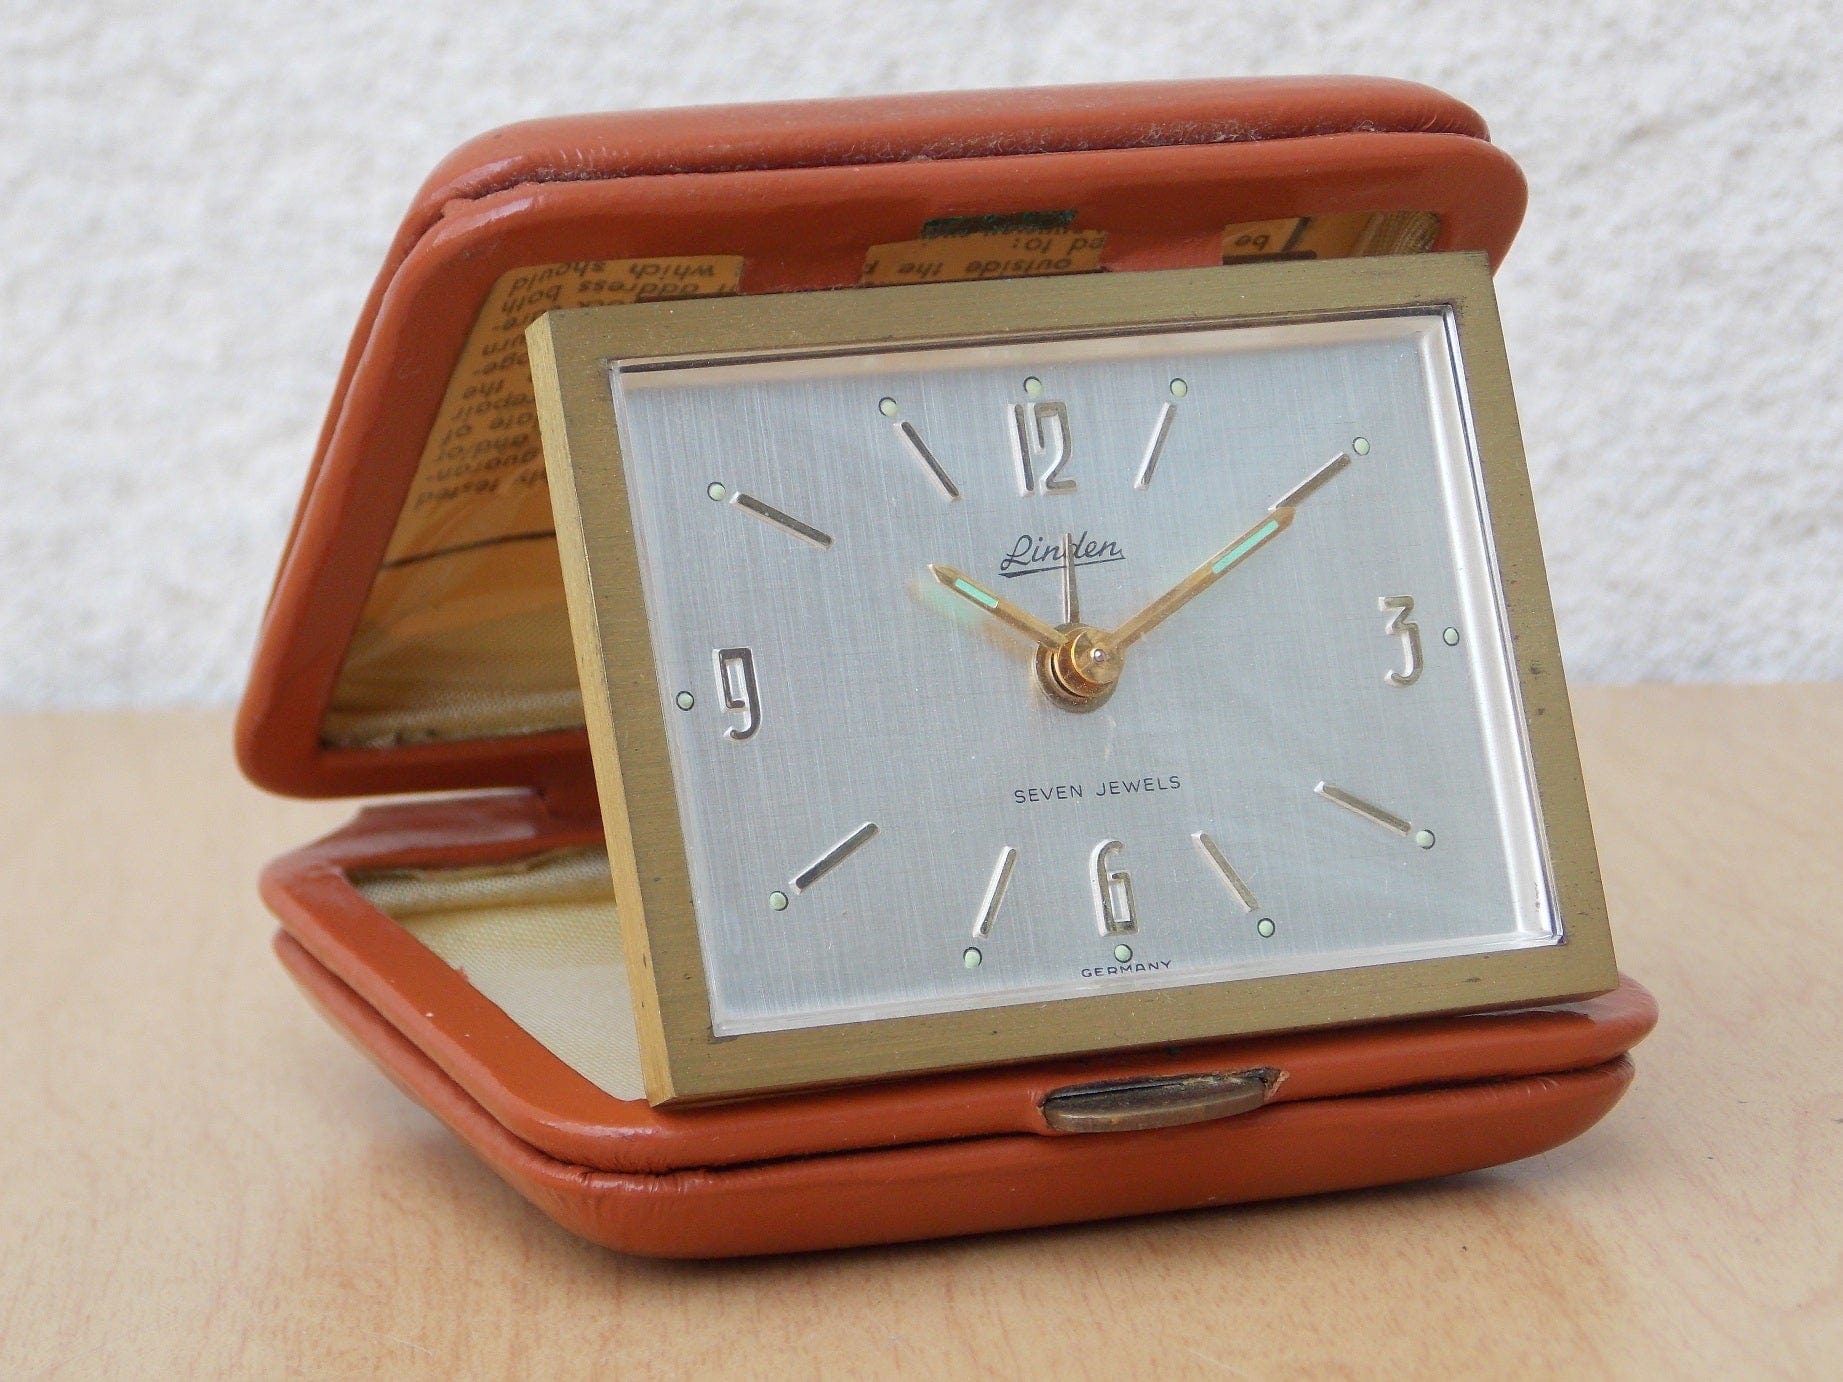 I Like Mike's Mid Century Modern Clock Linden Brass Brown Leather Travel Clock, Wind Up, 7 Jewels